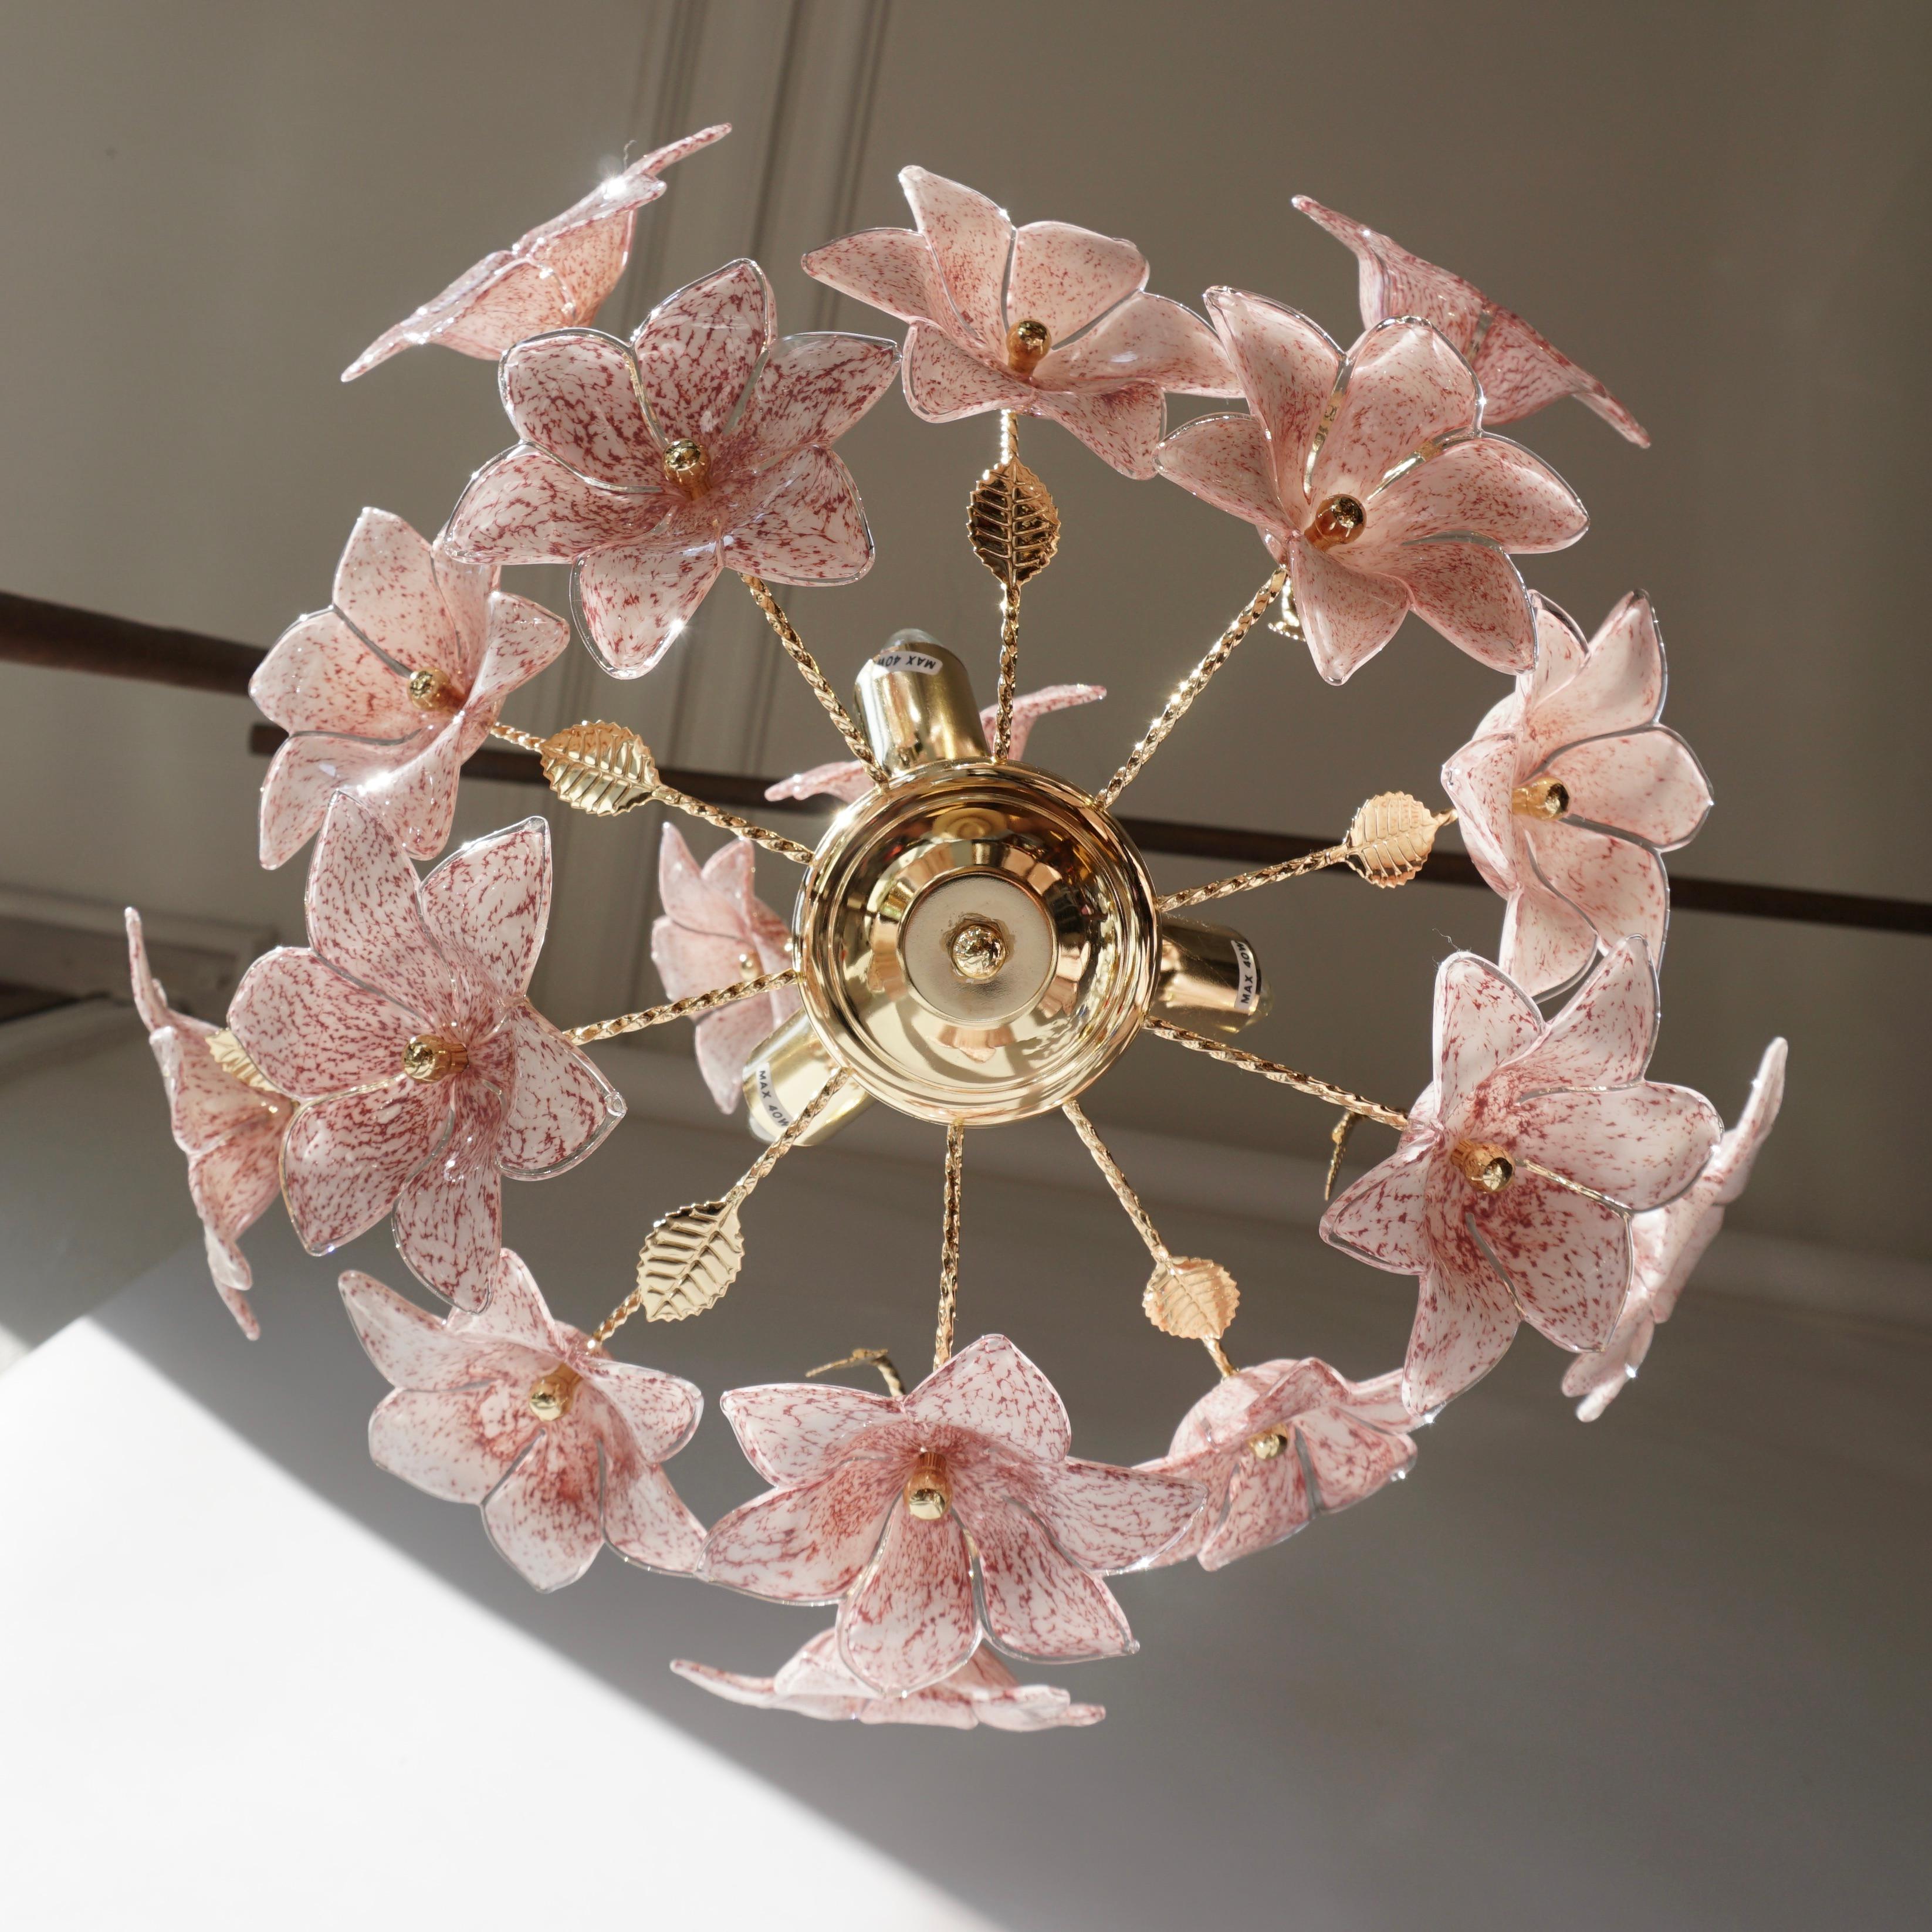 Italian brass chandelier with pink Murano glass flowers and brass leaves. 

The light requires three single E14 screw fit light bulbs (40Watt max.) LED compatible.

Measures: Diameter 40 cm. 
Height fixture 44 cm.
Total height with chain 75 cm.